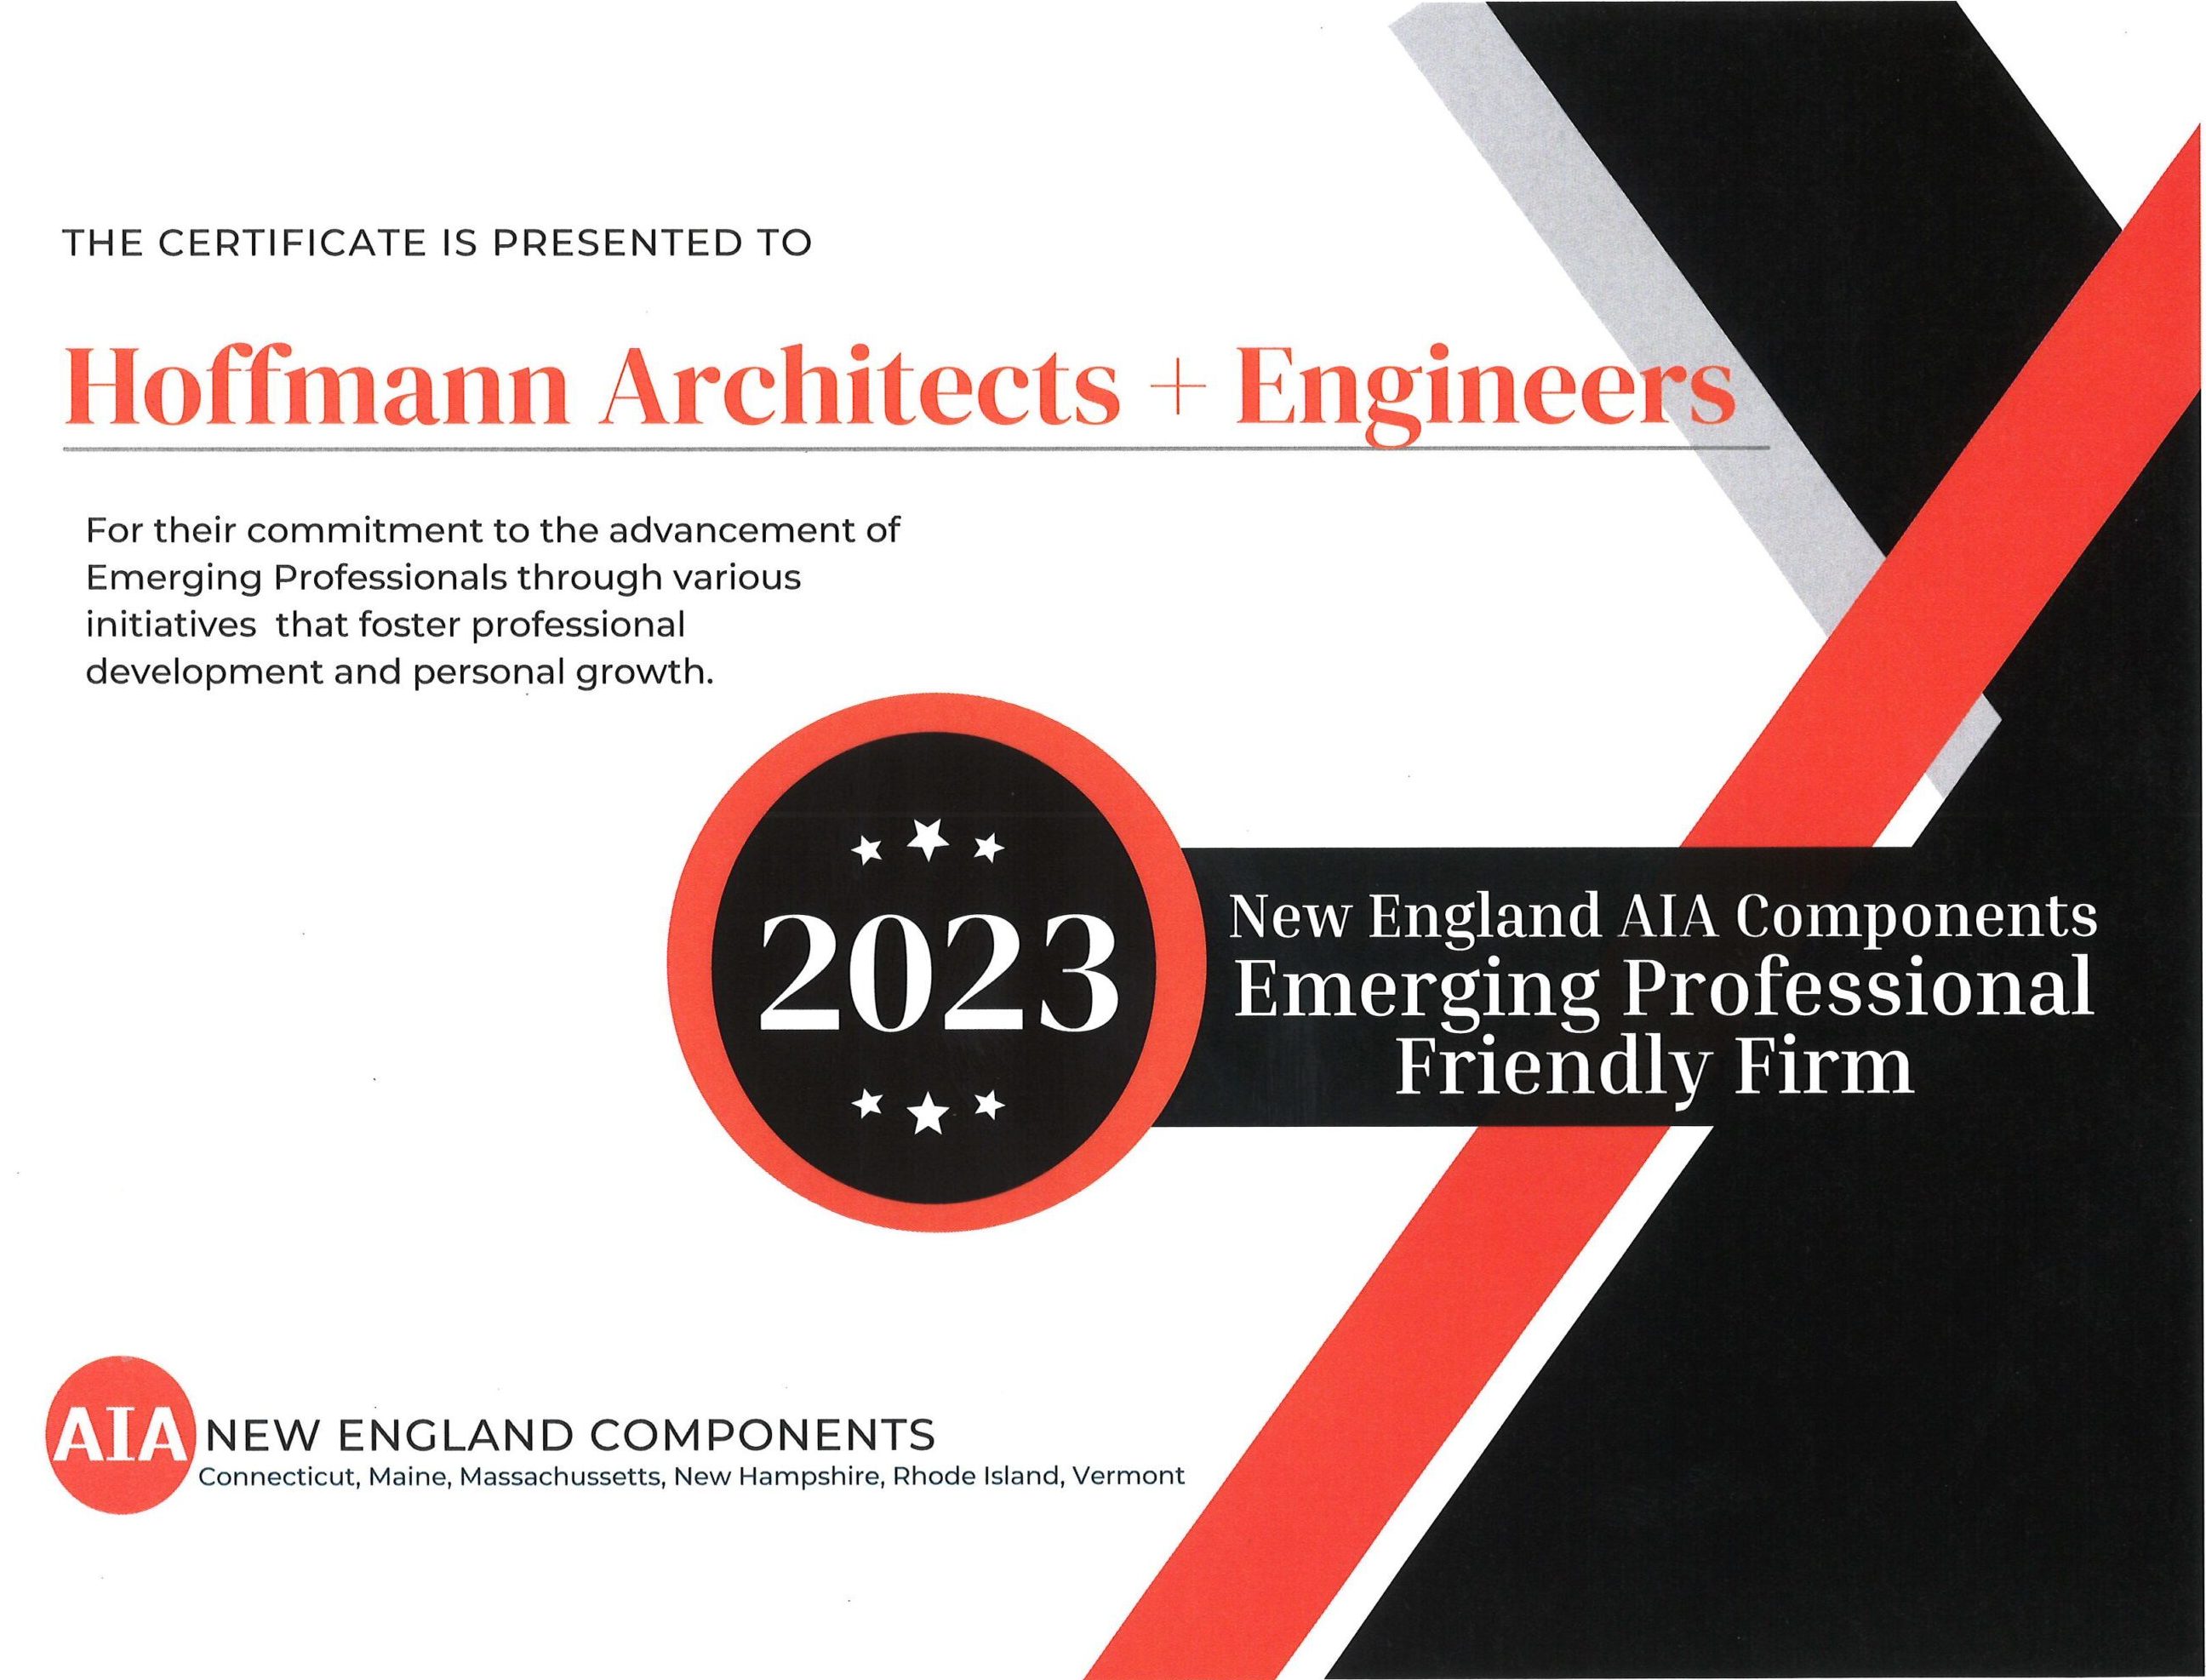 Certificate presented to Hoffmann Architects + Engineers for the 2023 AIA New England Emerging Professional Friendly Firm Award